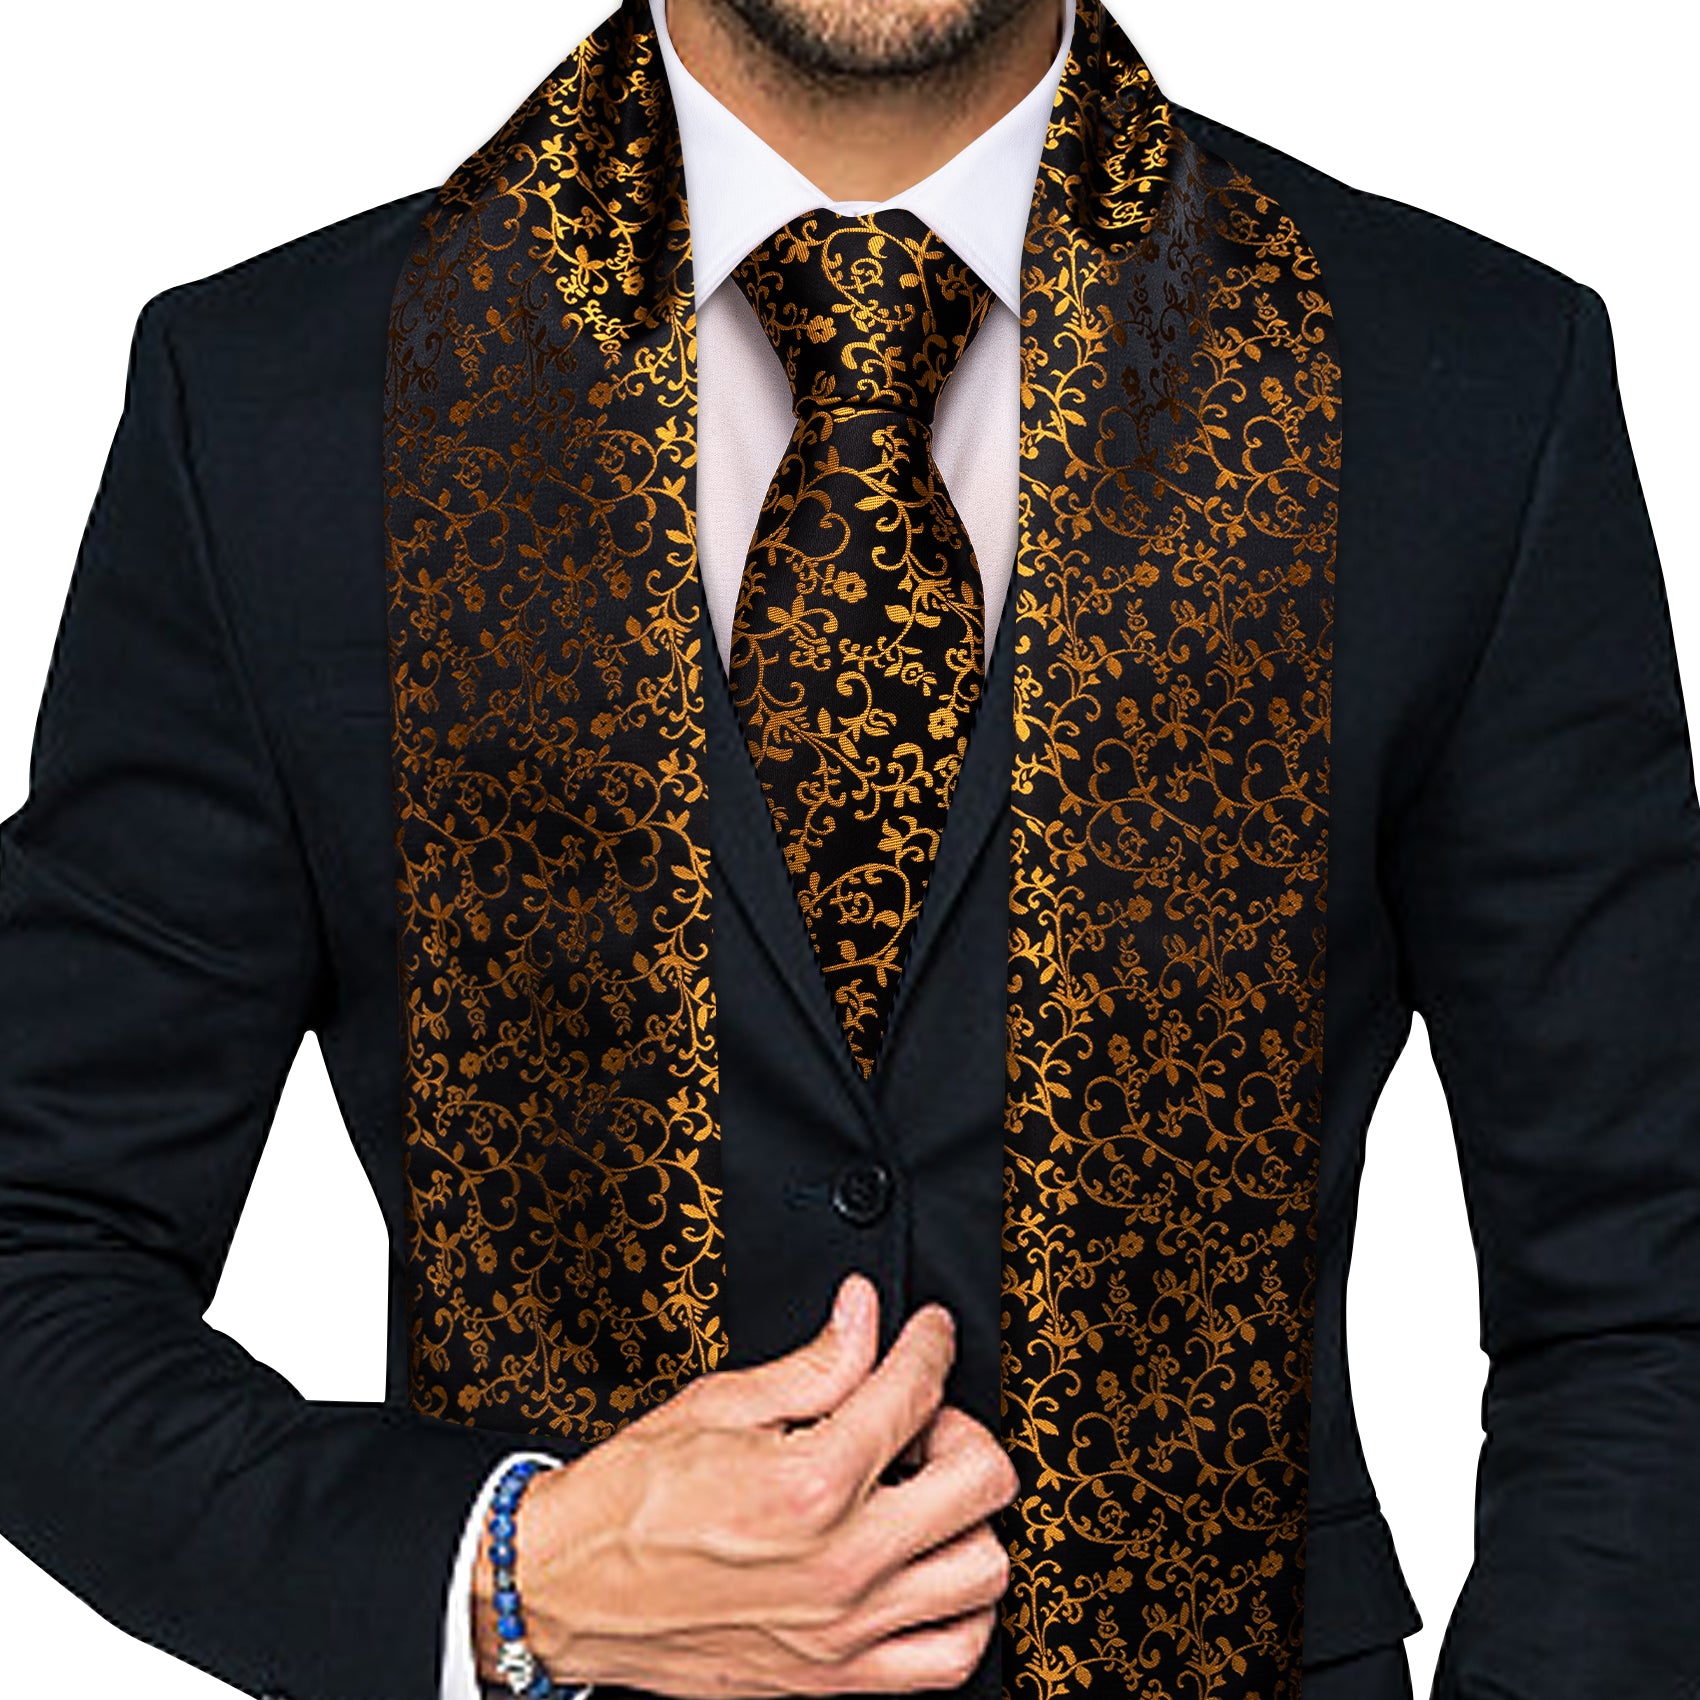 Luxury Gold Black Floral Scarf with Tie Set